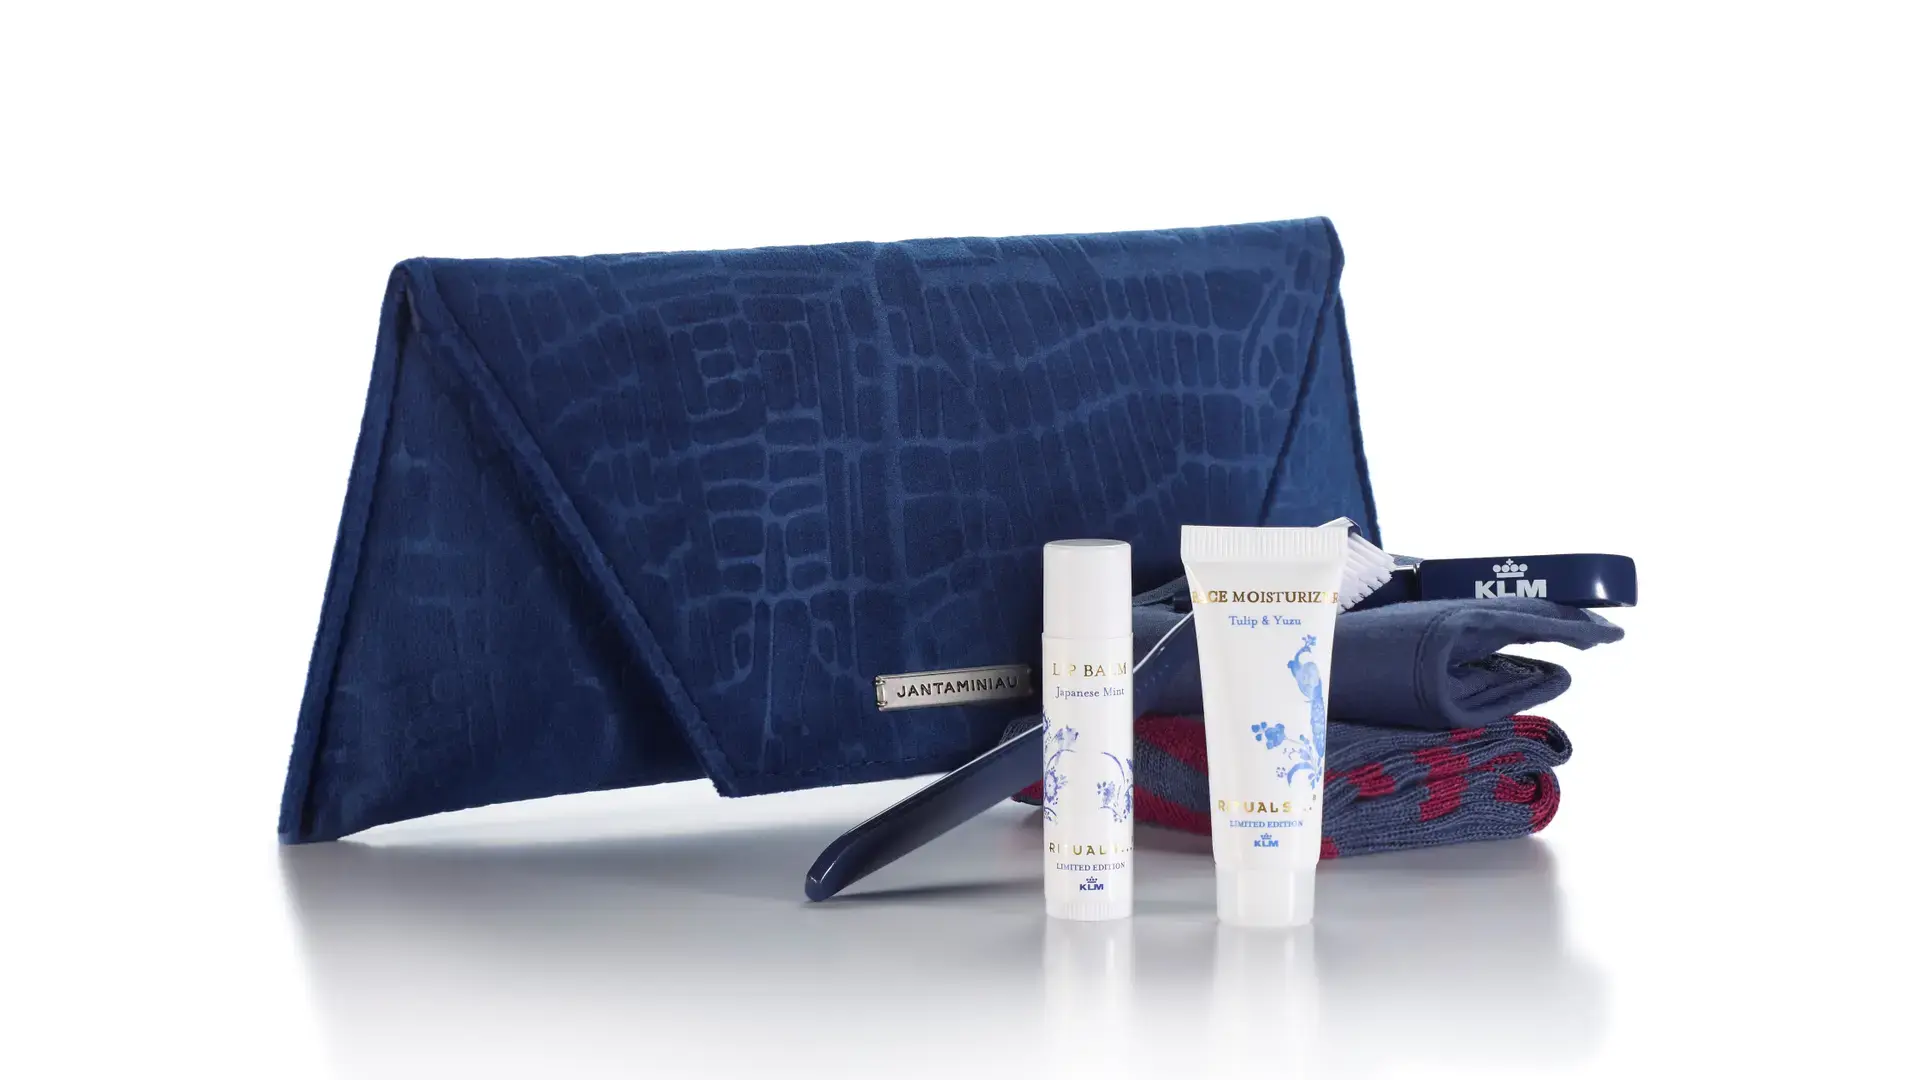  Jan Taminiau products on KLM business class